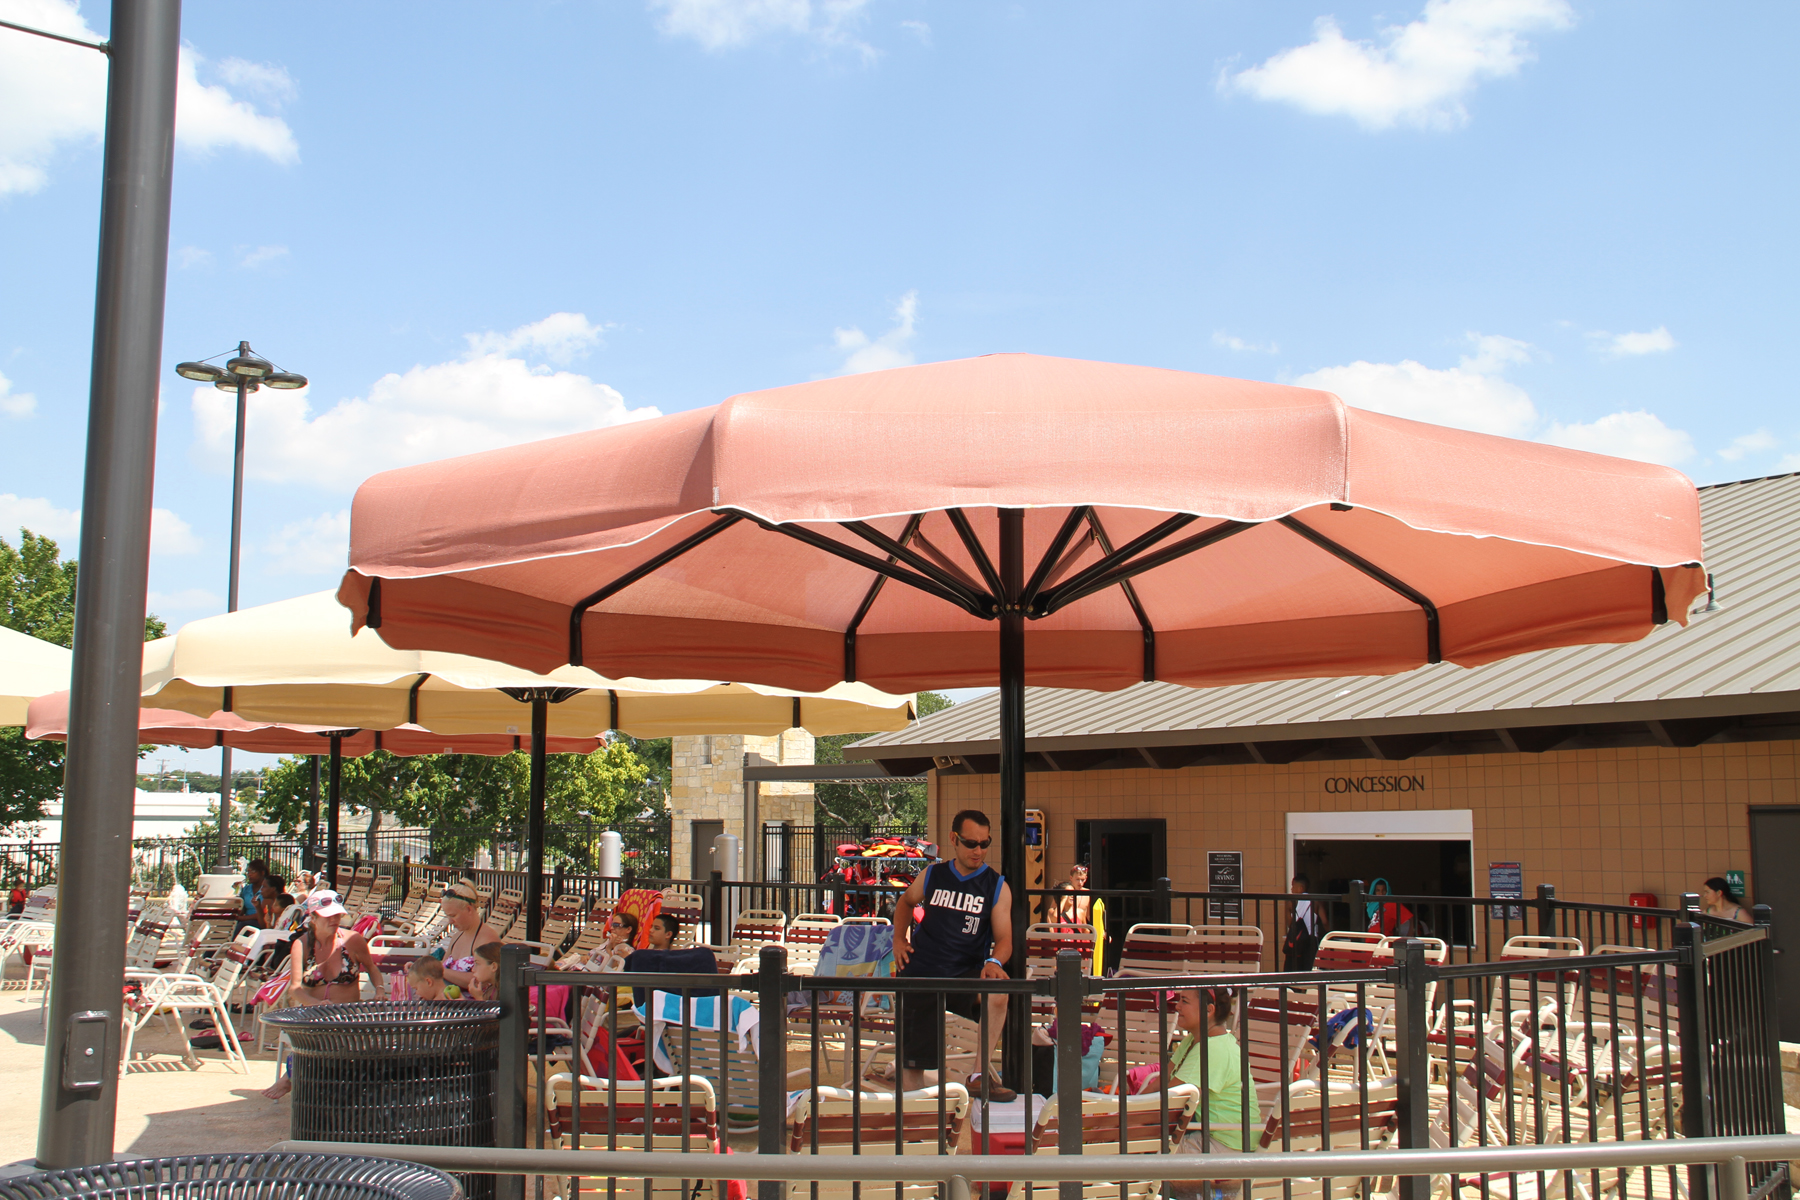 large umbrella shades covering people sitting outdoors